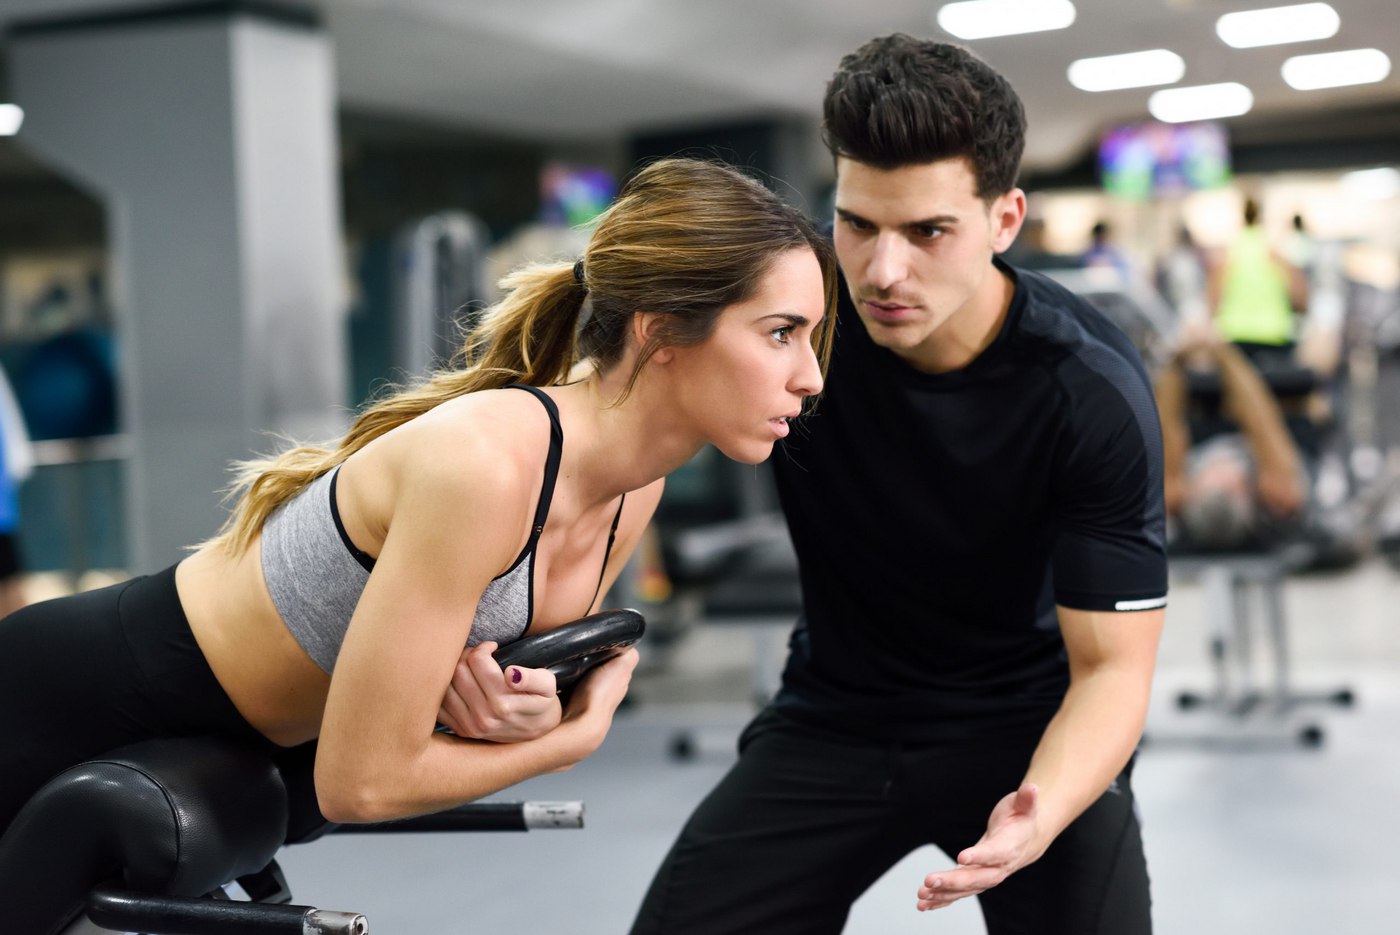 Group Exercise vs. Personal Trainer